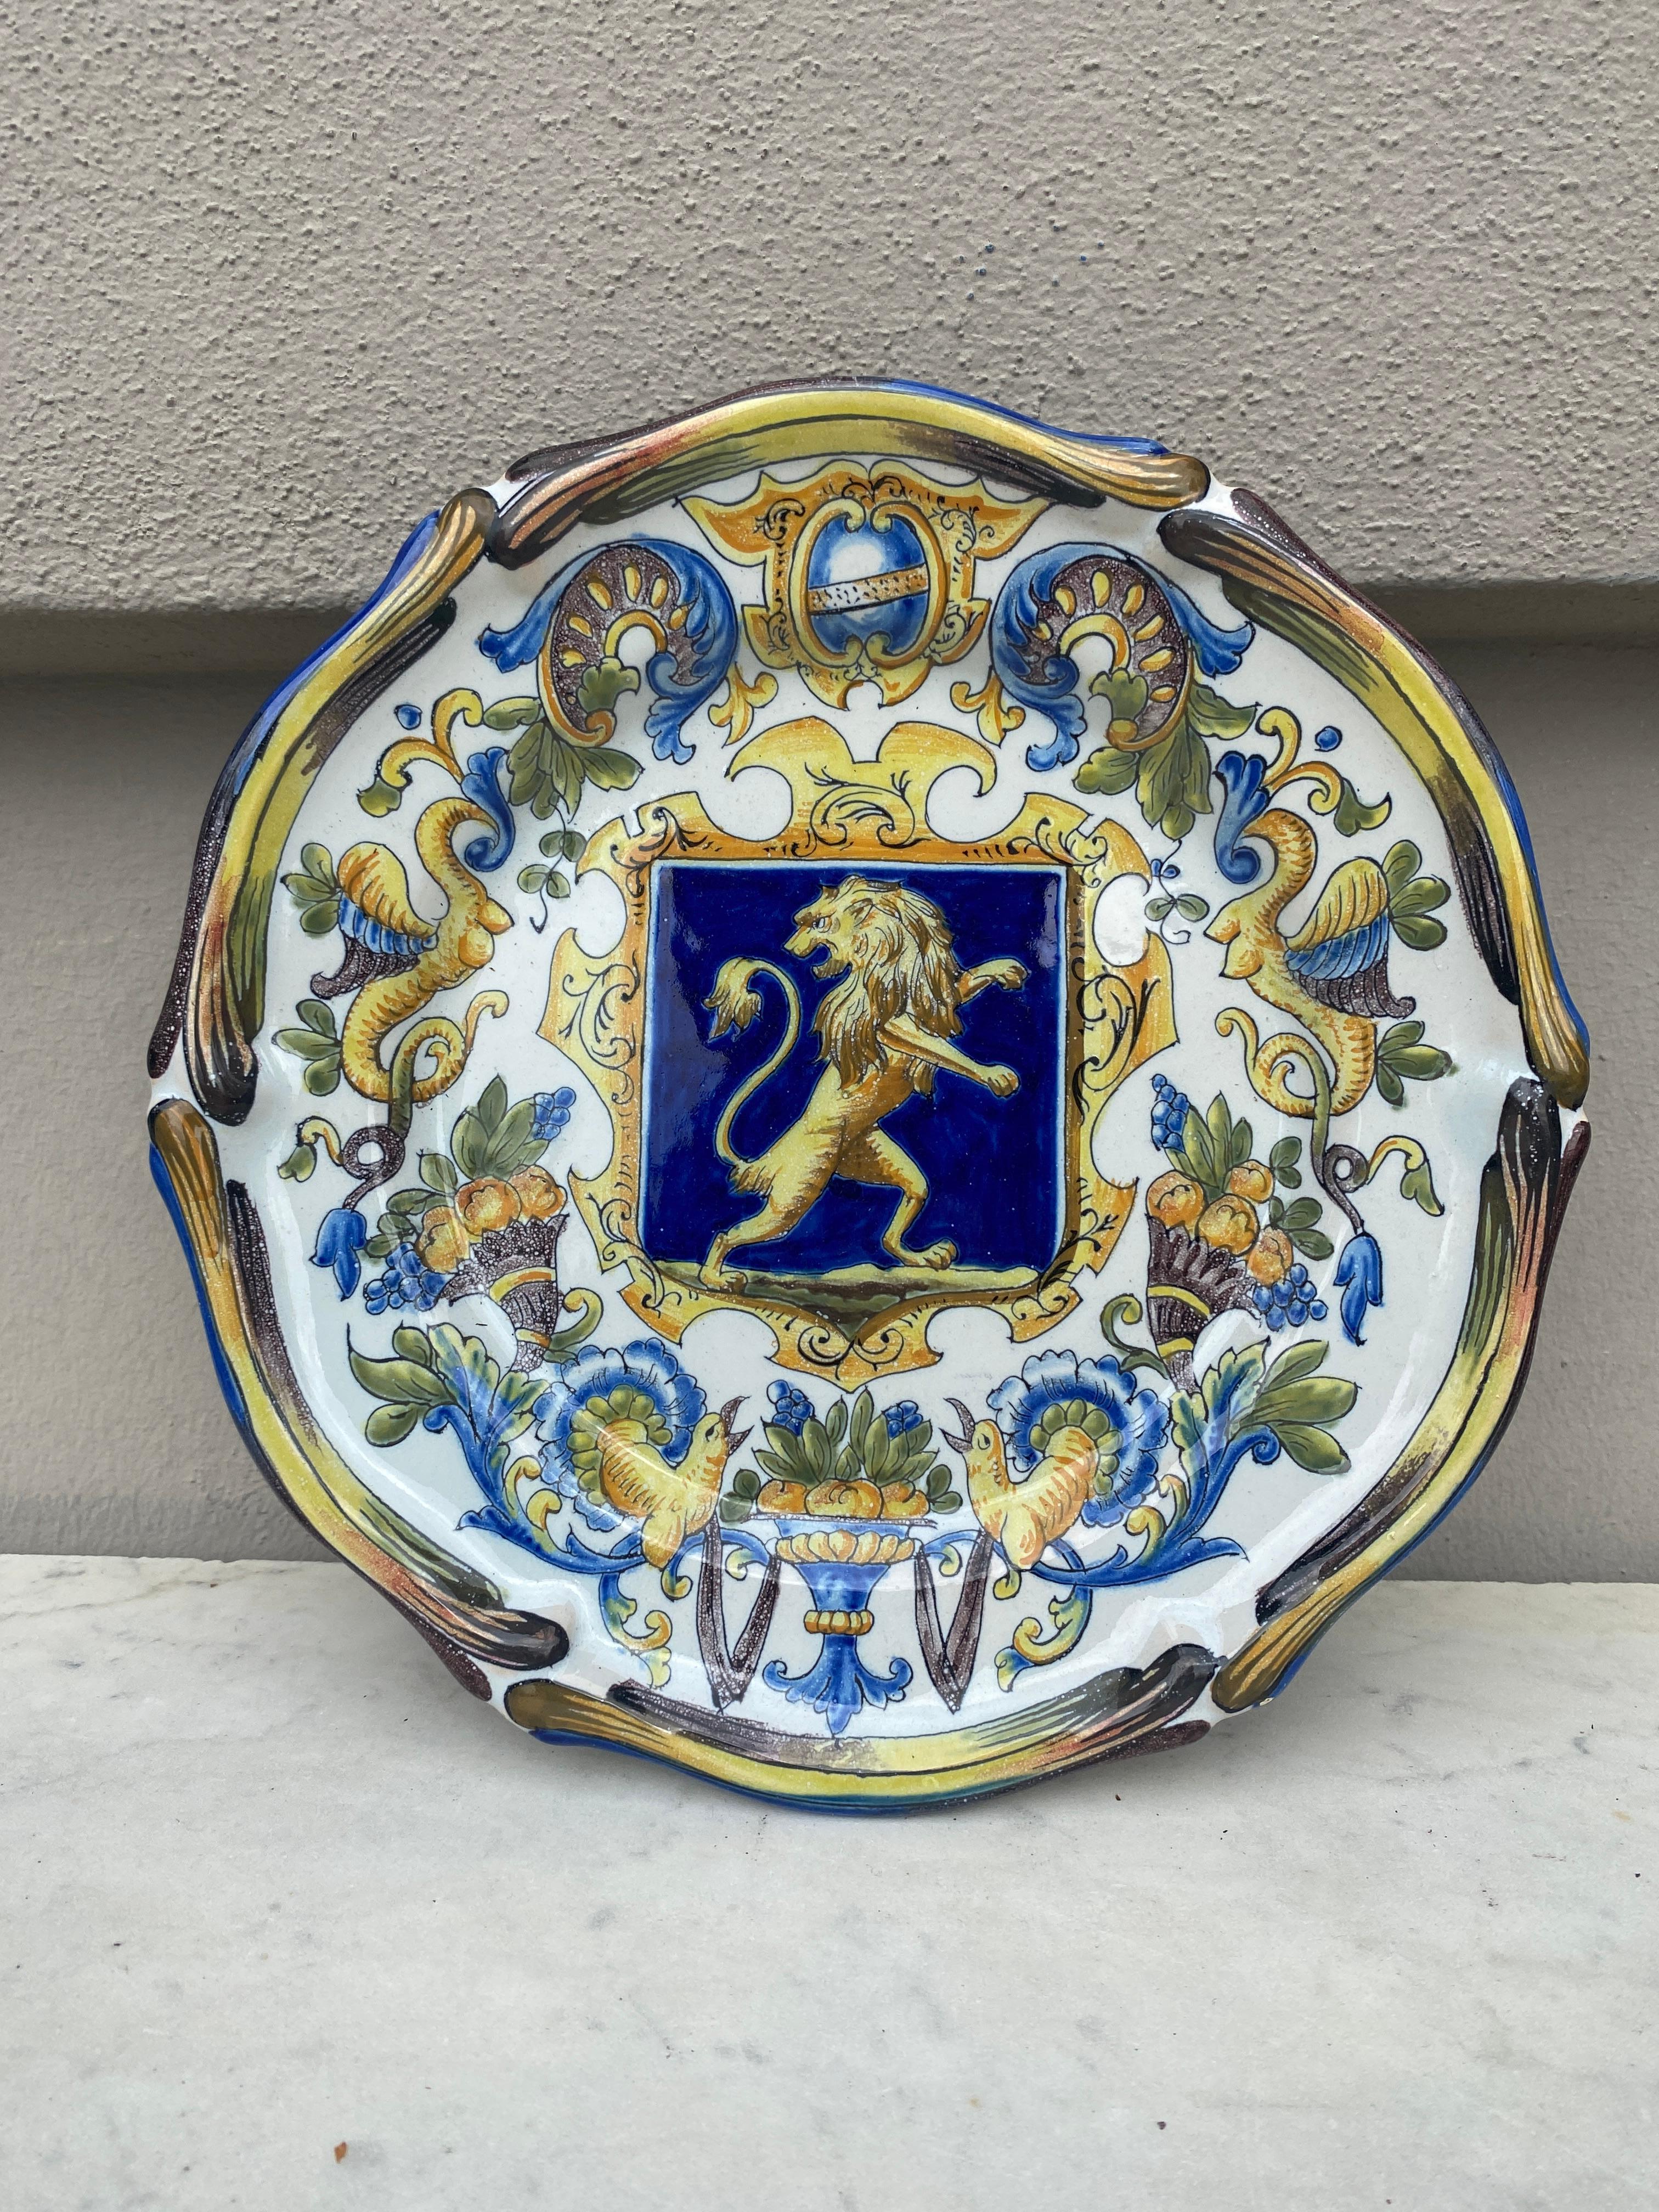 Pair of French Faience Plate Coat of Arms signed Keller & Guerin Saint Clement, circa 1900.
Decorated with coat of arms and lions.
Neo Renaissance style.